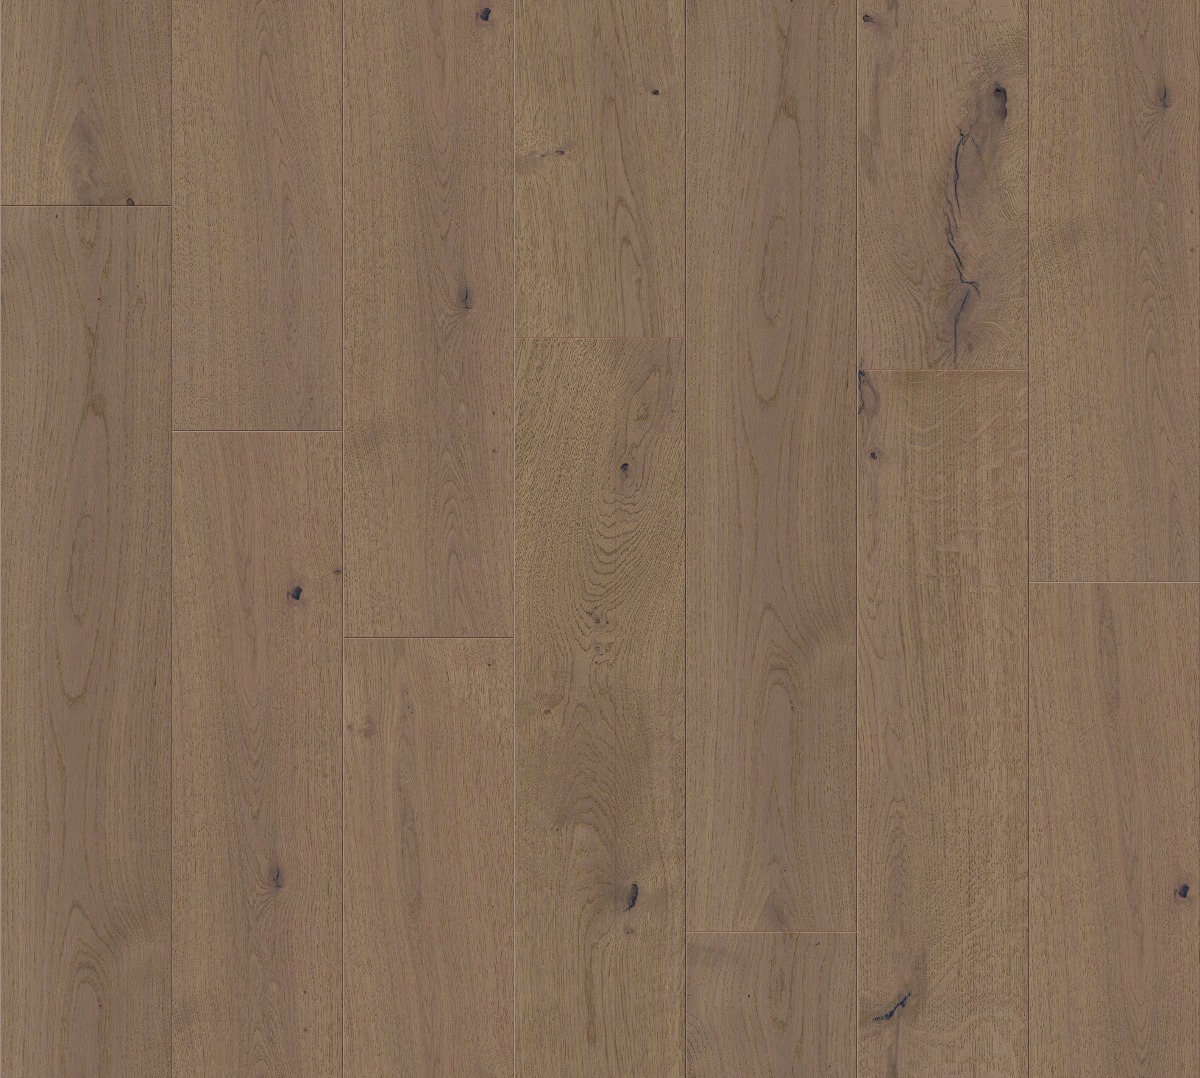 A seamless wood texture with benchmark oak 3060 boards arranged in a  pattern